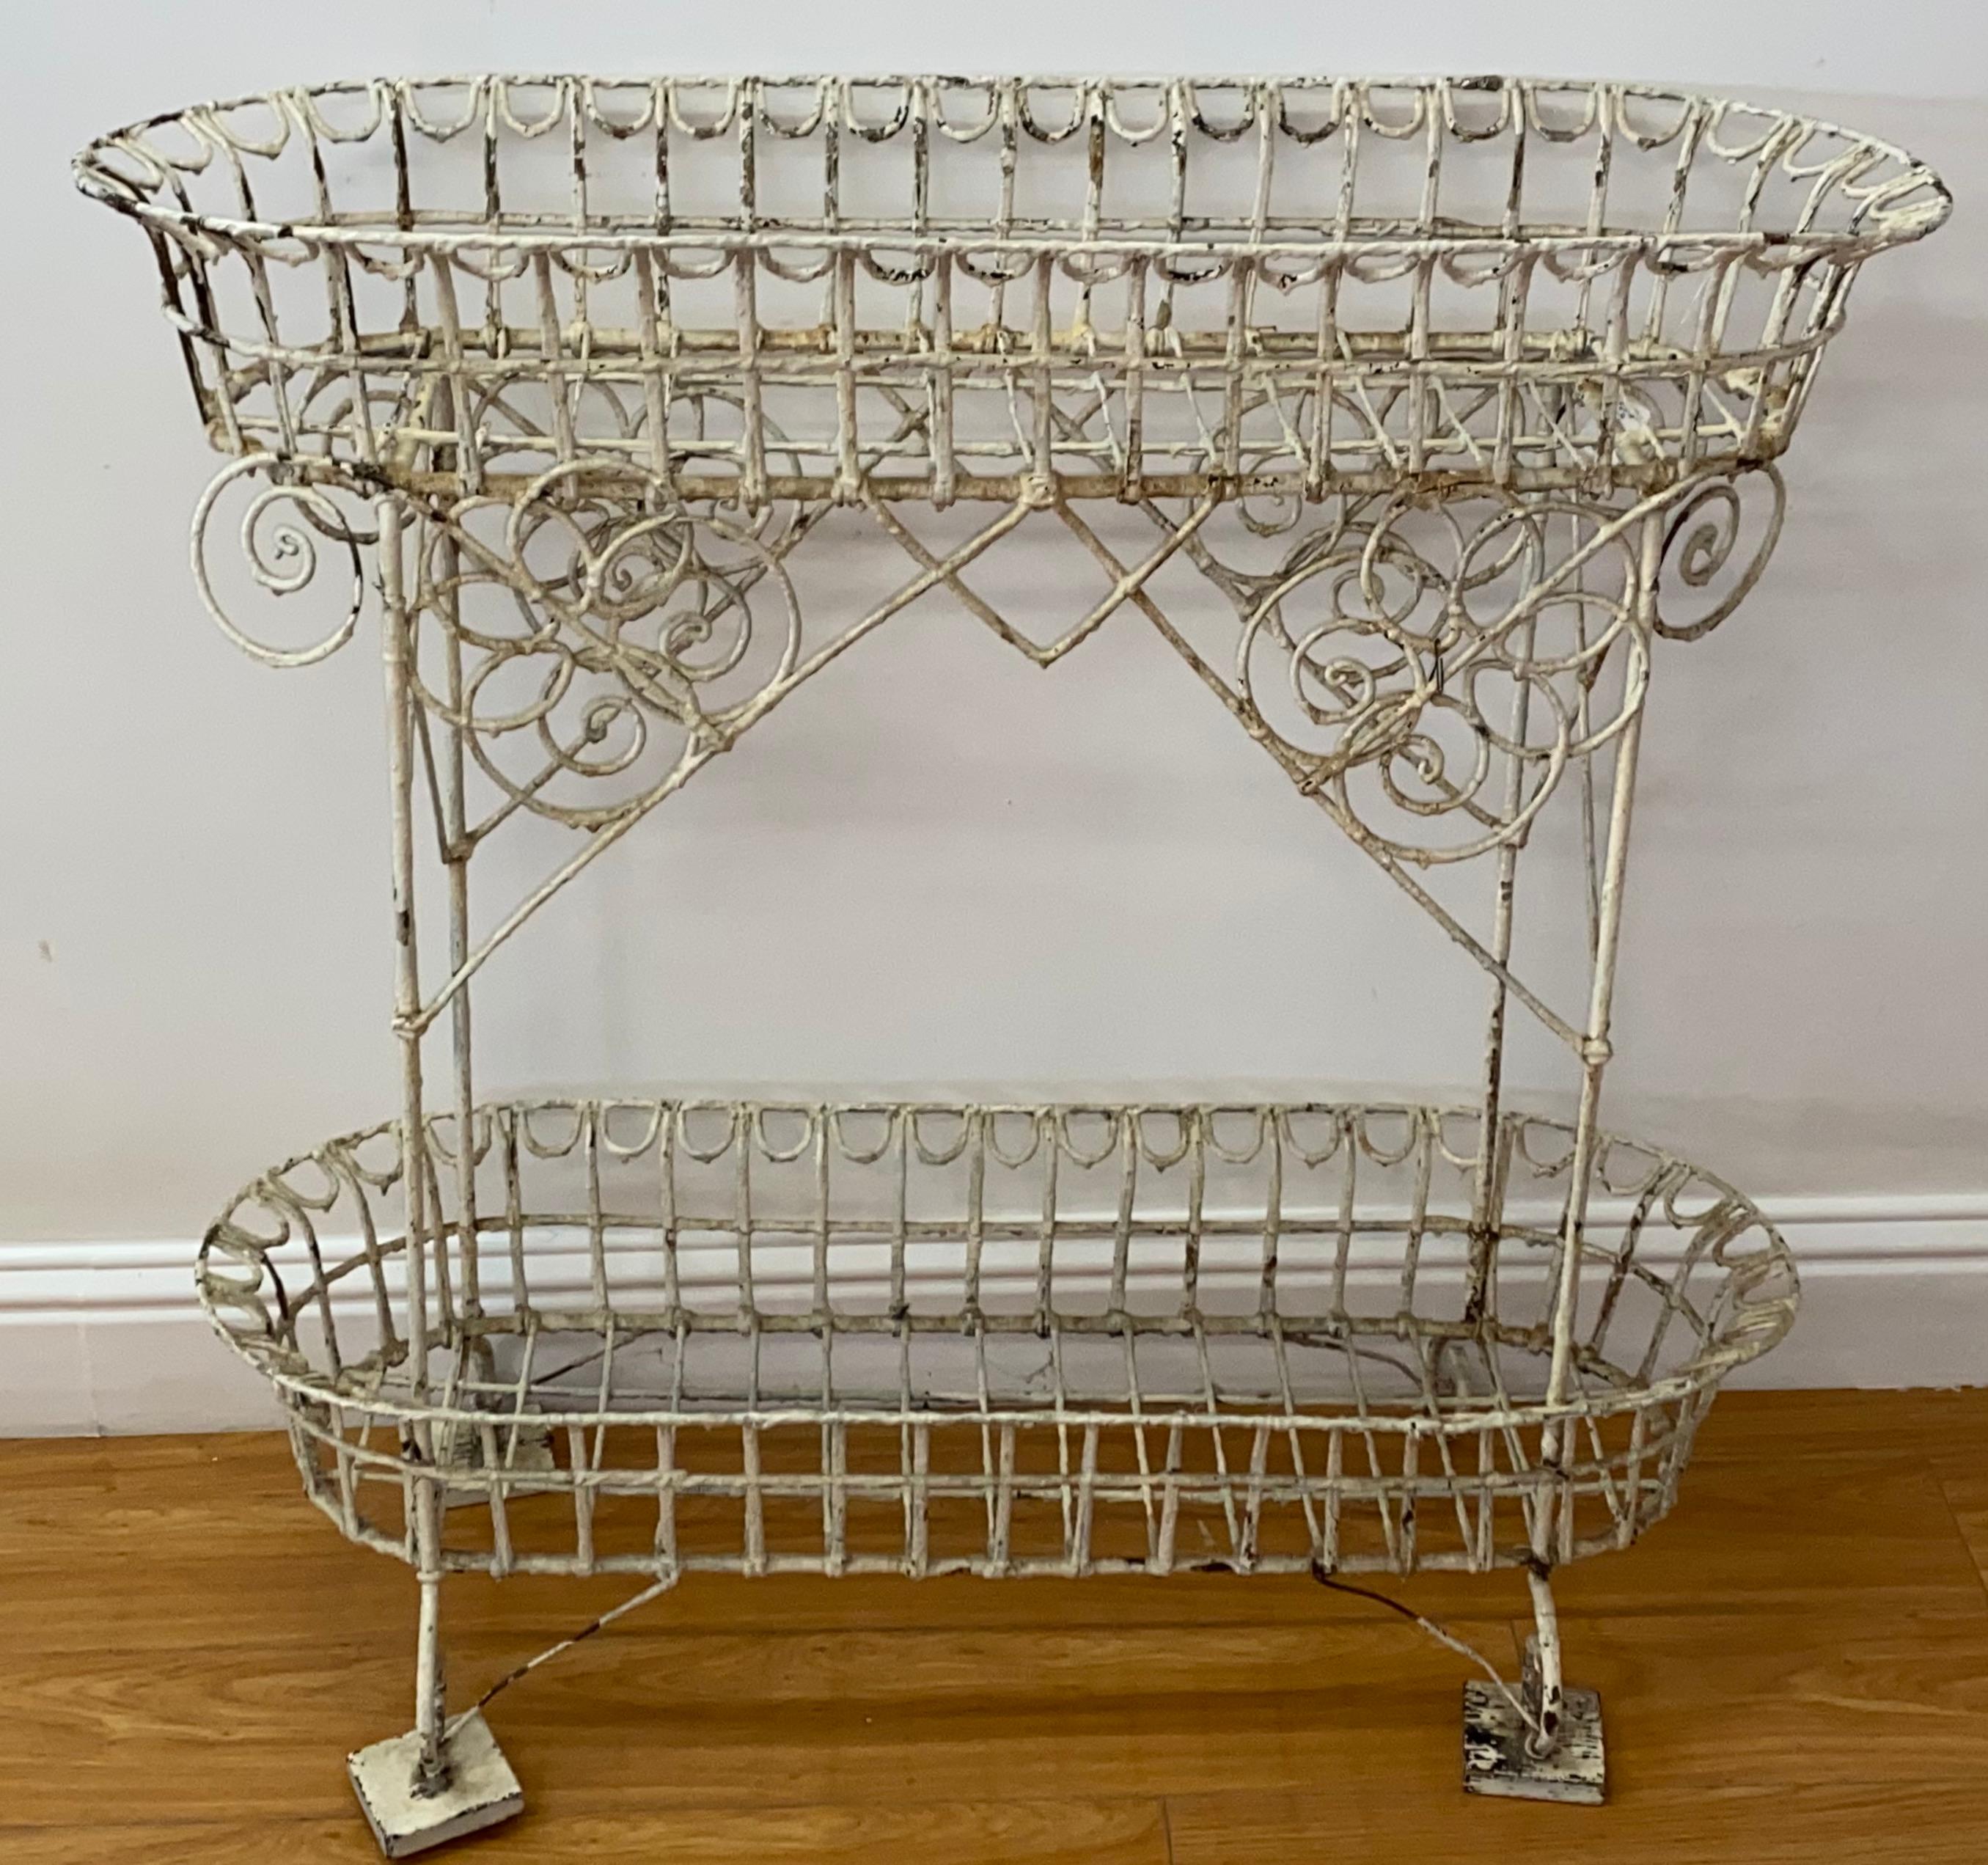 19th century American wrought iron plant stand

Hand made plant stand with one drip tray that can be used on the top or bottom

Painted white

Two of the feet have wooden blocks, easily add two more, or remove 

Measures: 36.5